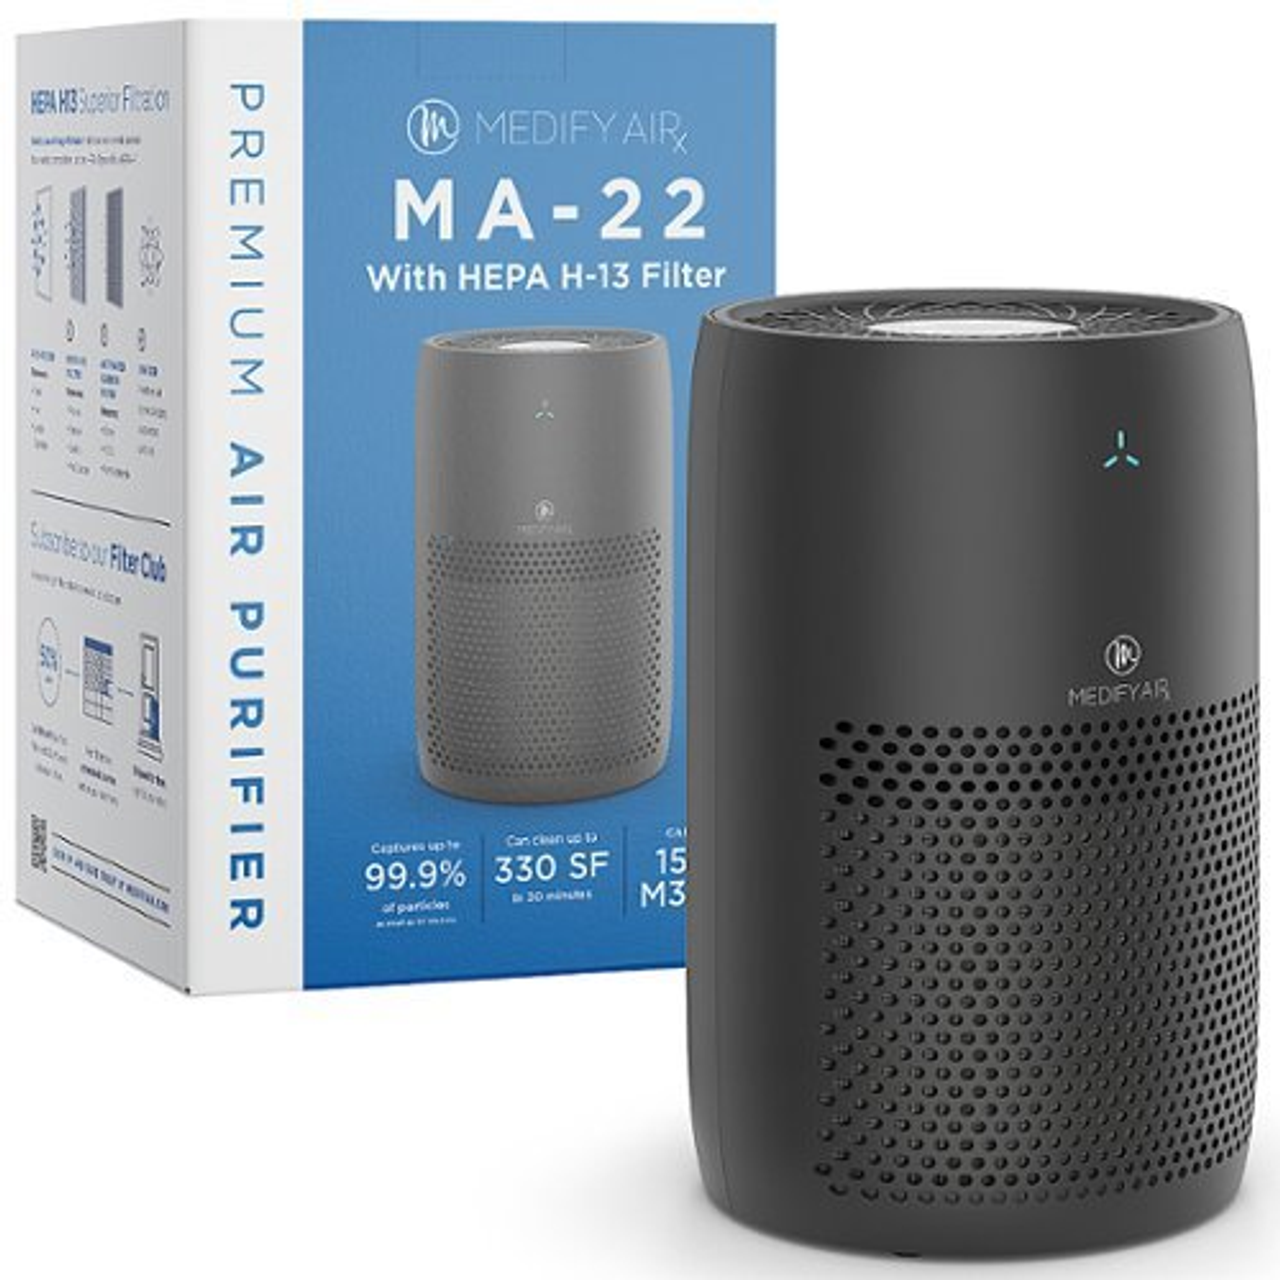 Medify Air - Medify MA-22 Air Purifier with H13 True HEPA Filter | 330 sq ft Coverage | 99.9% Removal to 0.1 Microns | Black, 1-Pack - Black